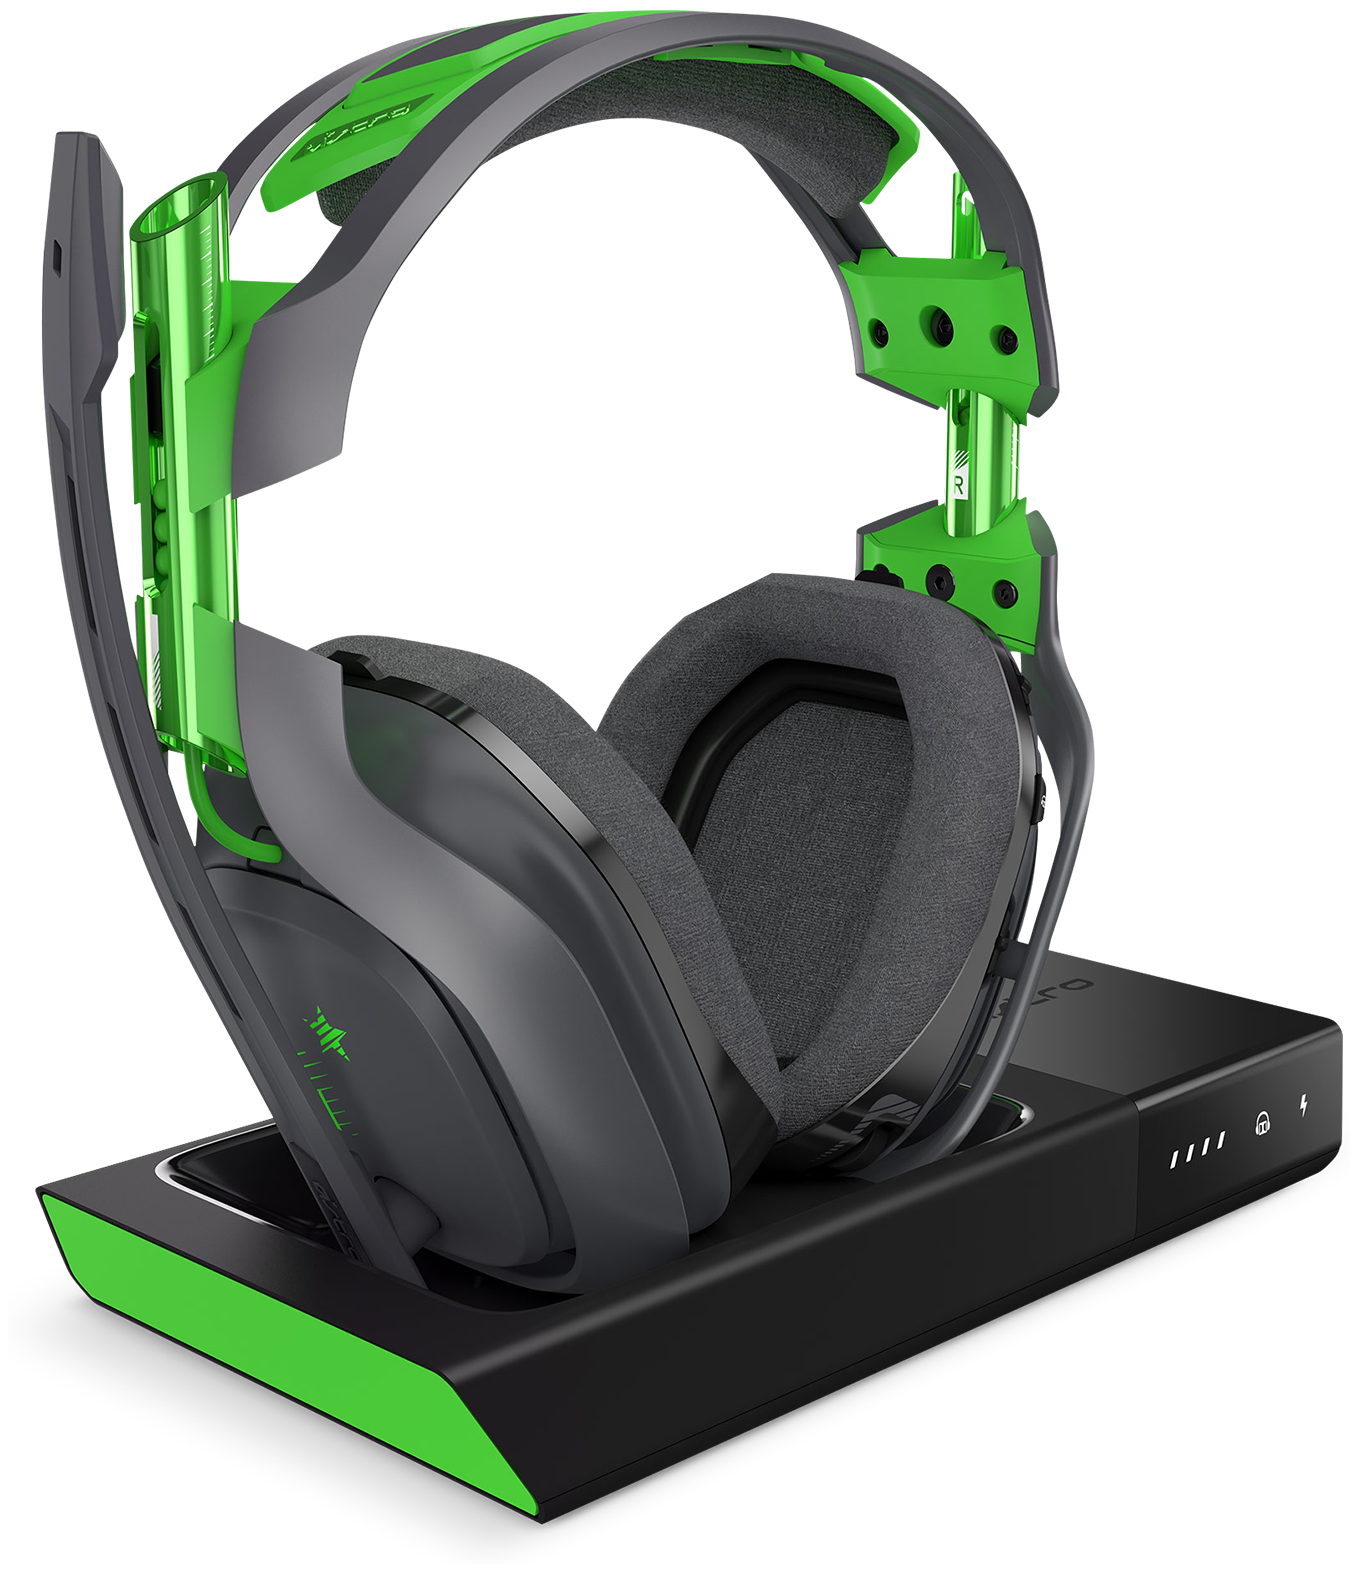 headset for pc and xbox one